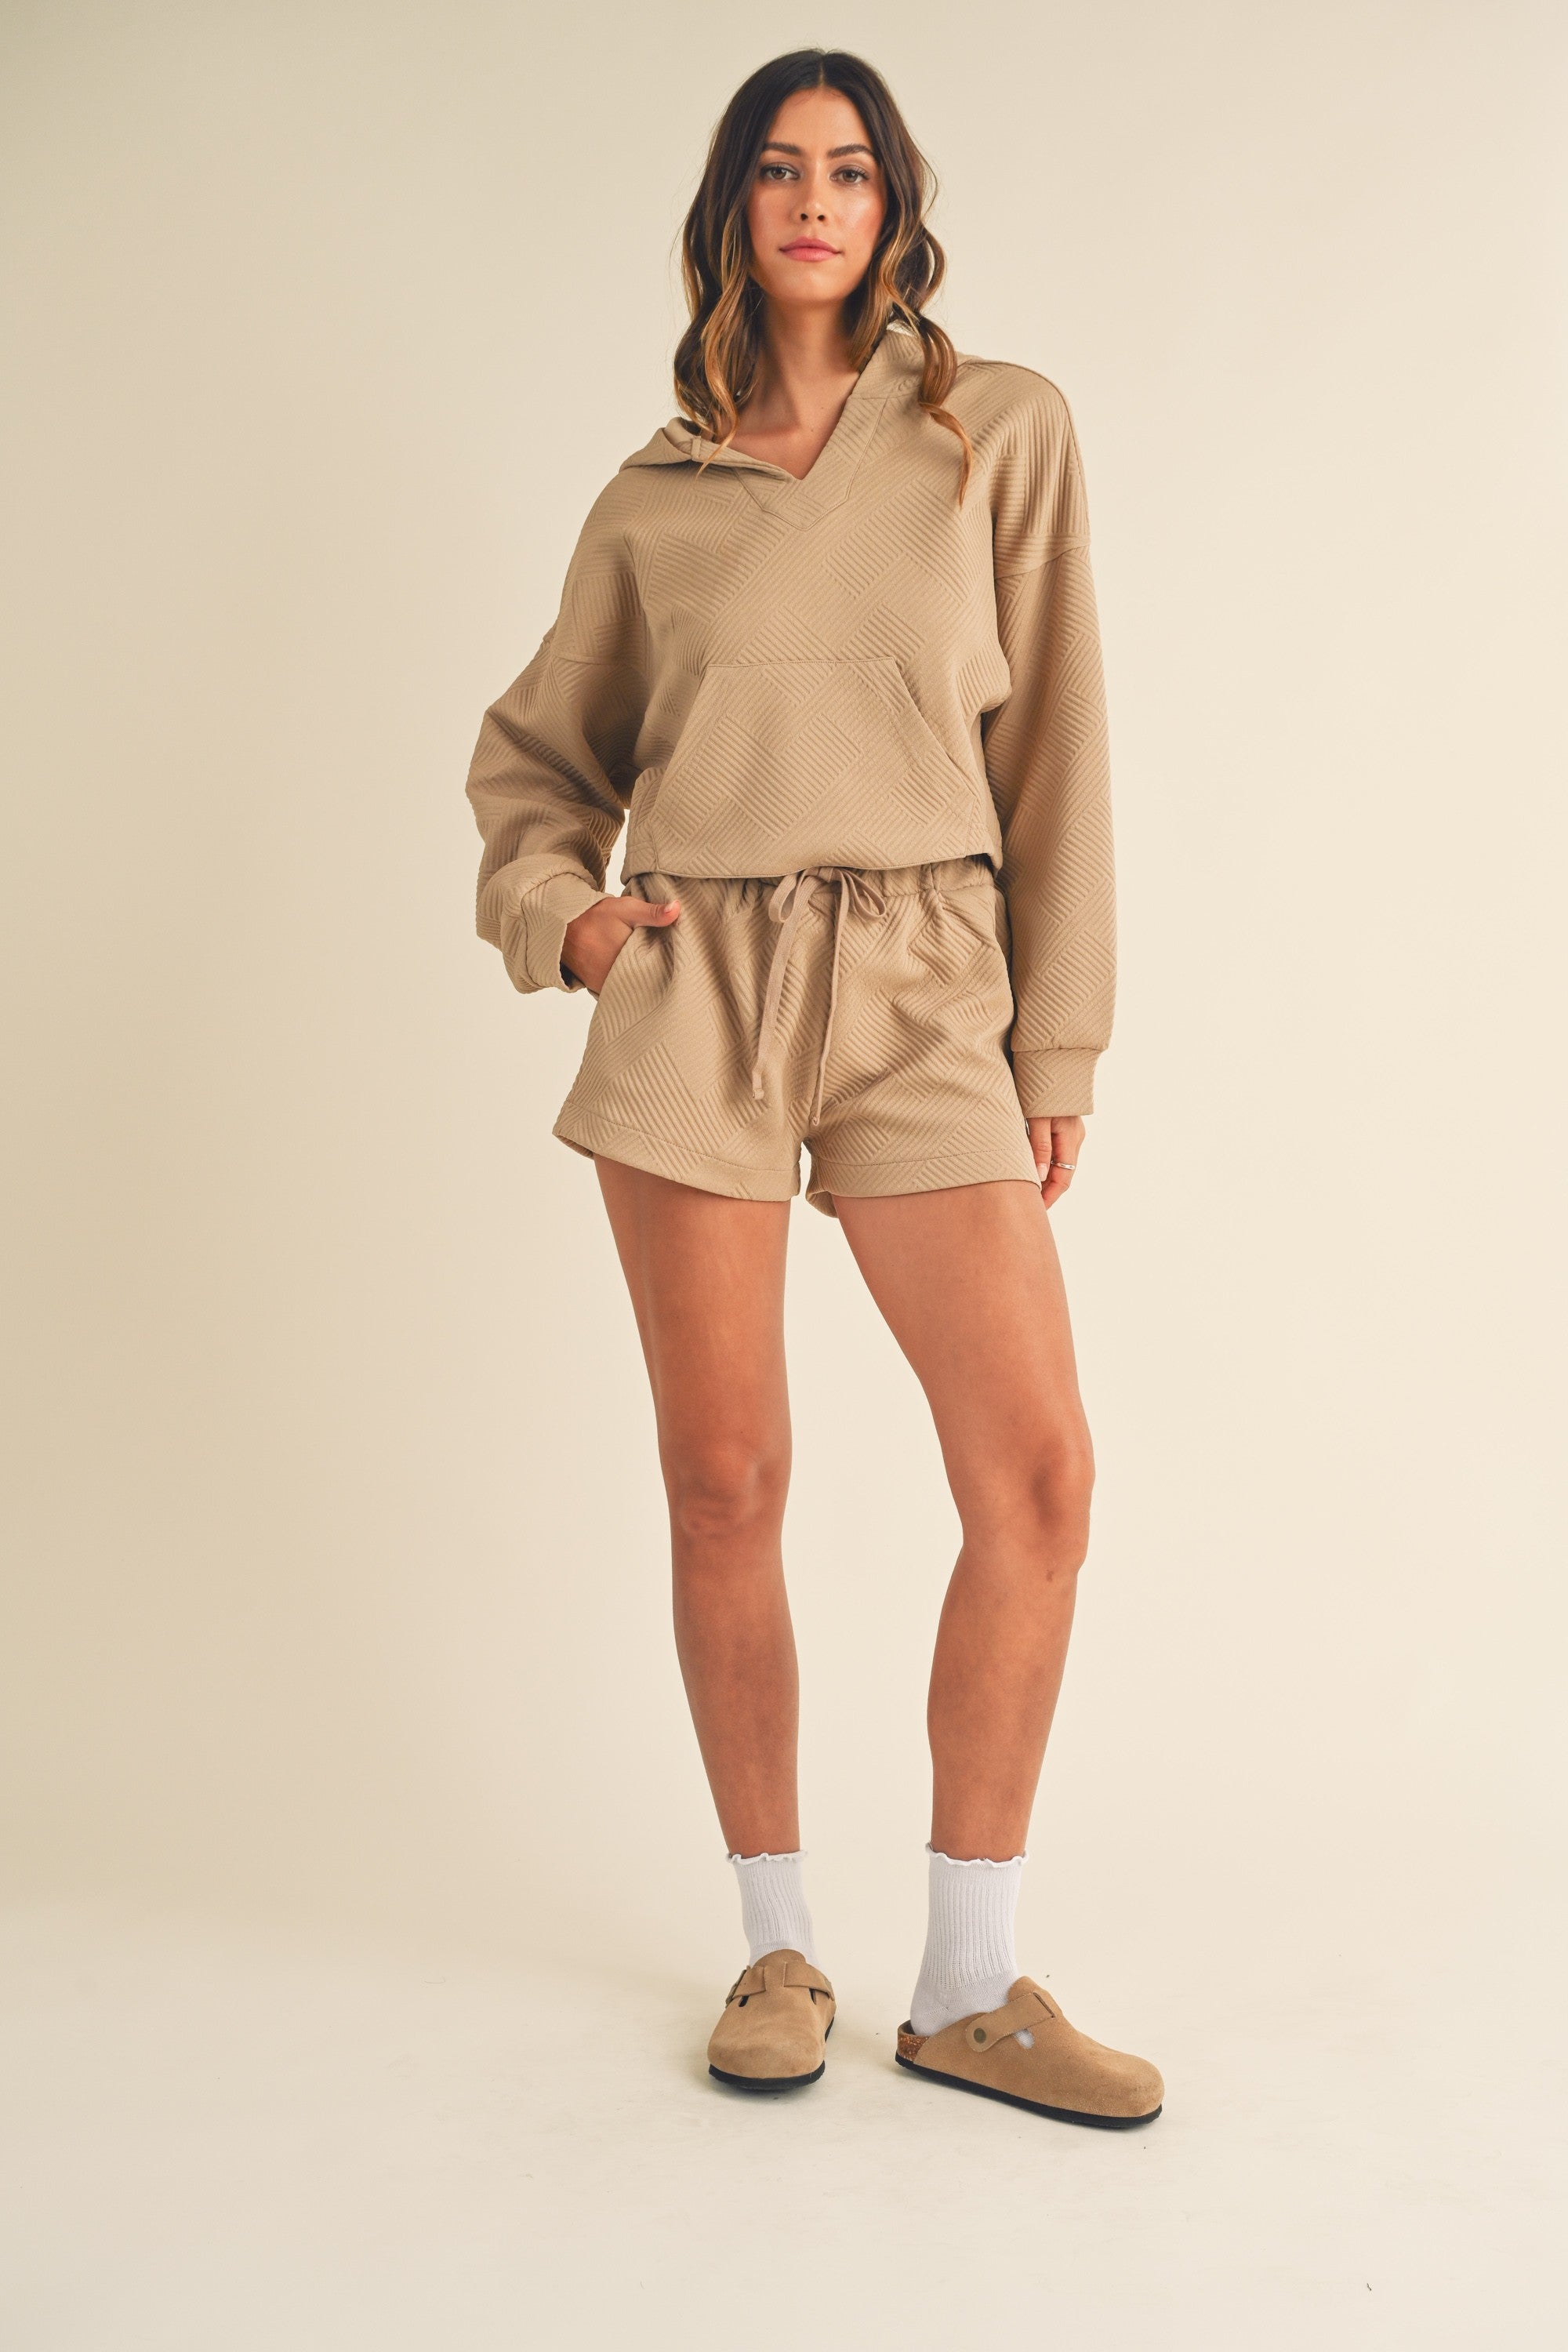 Beige Mable Sweater